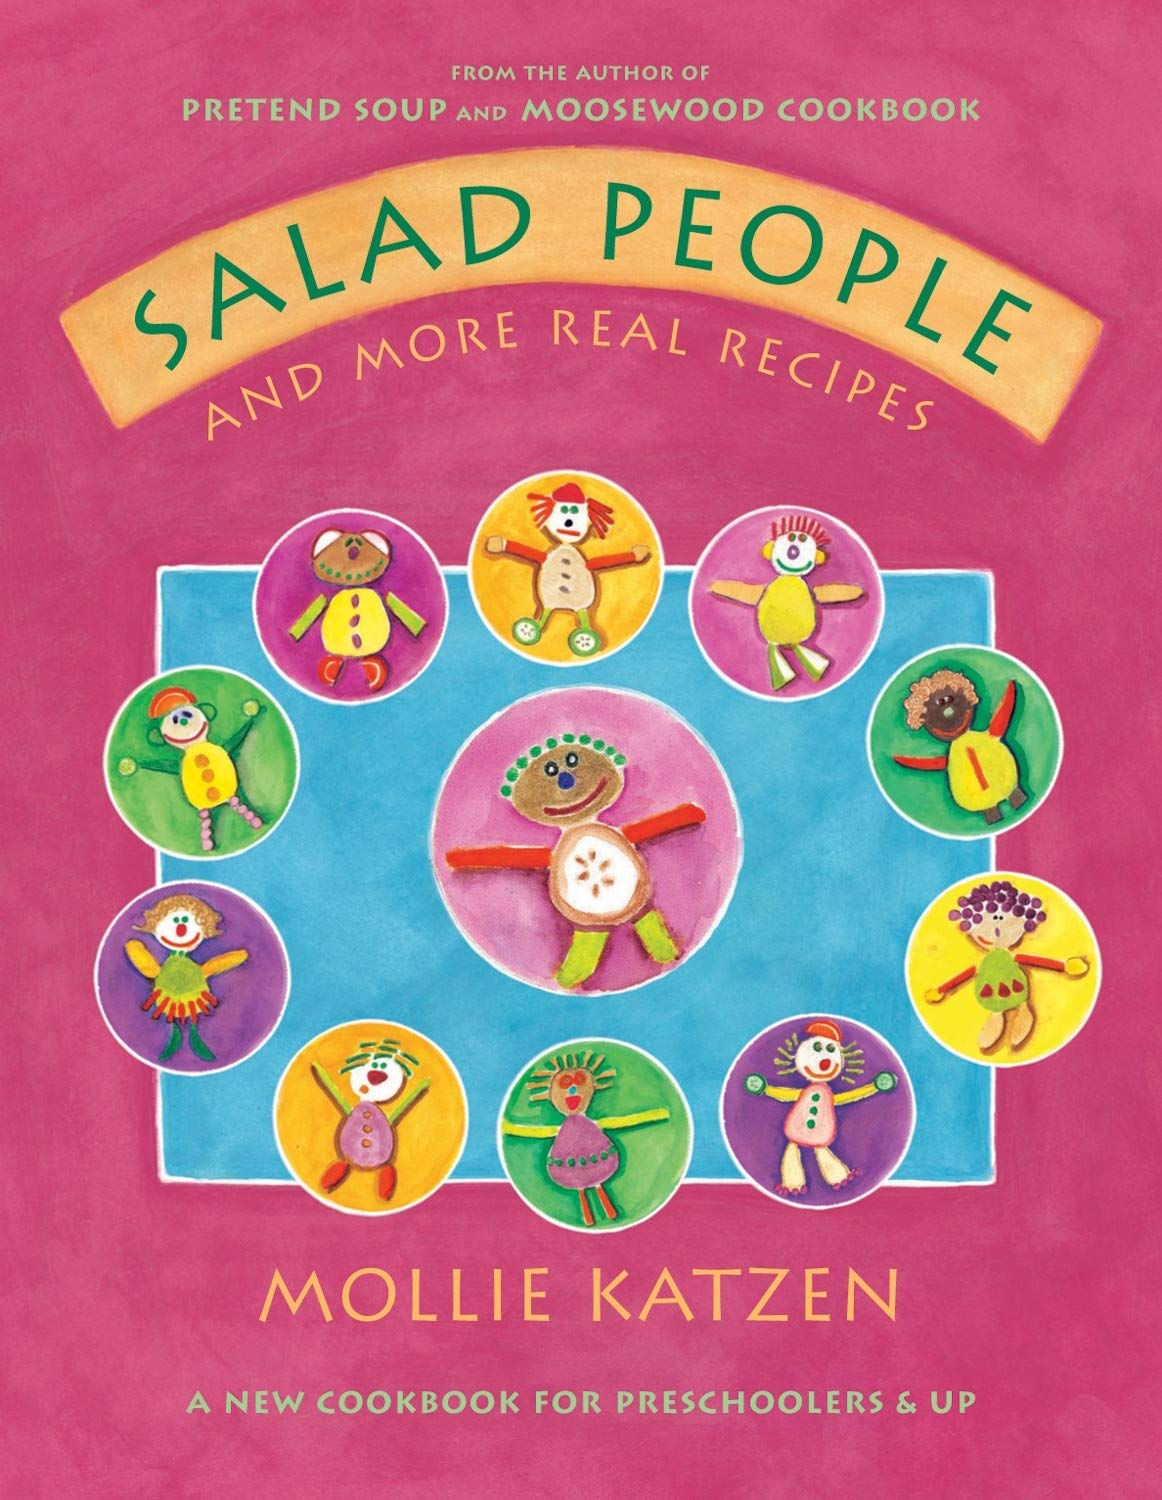 Salad People and More Real Recipes: A New Cookbook for Preschoolers and Up (Mollie Katzen)